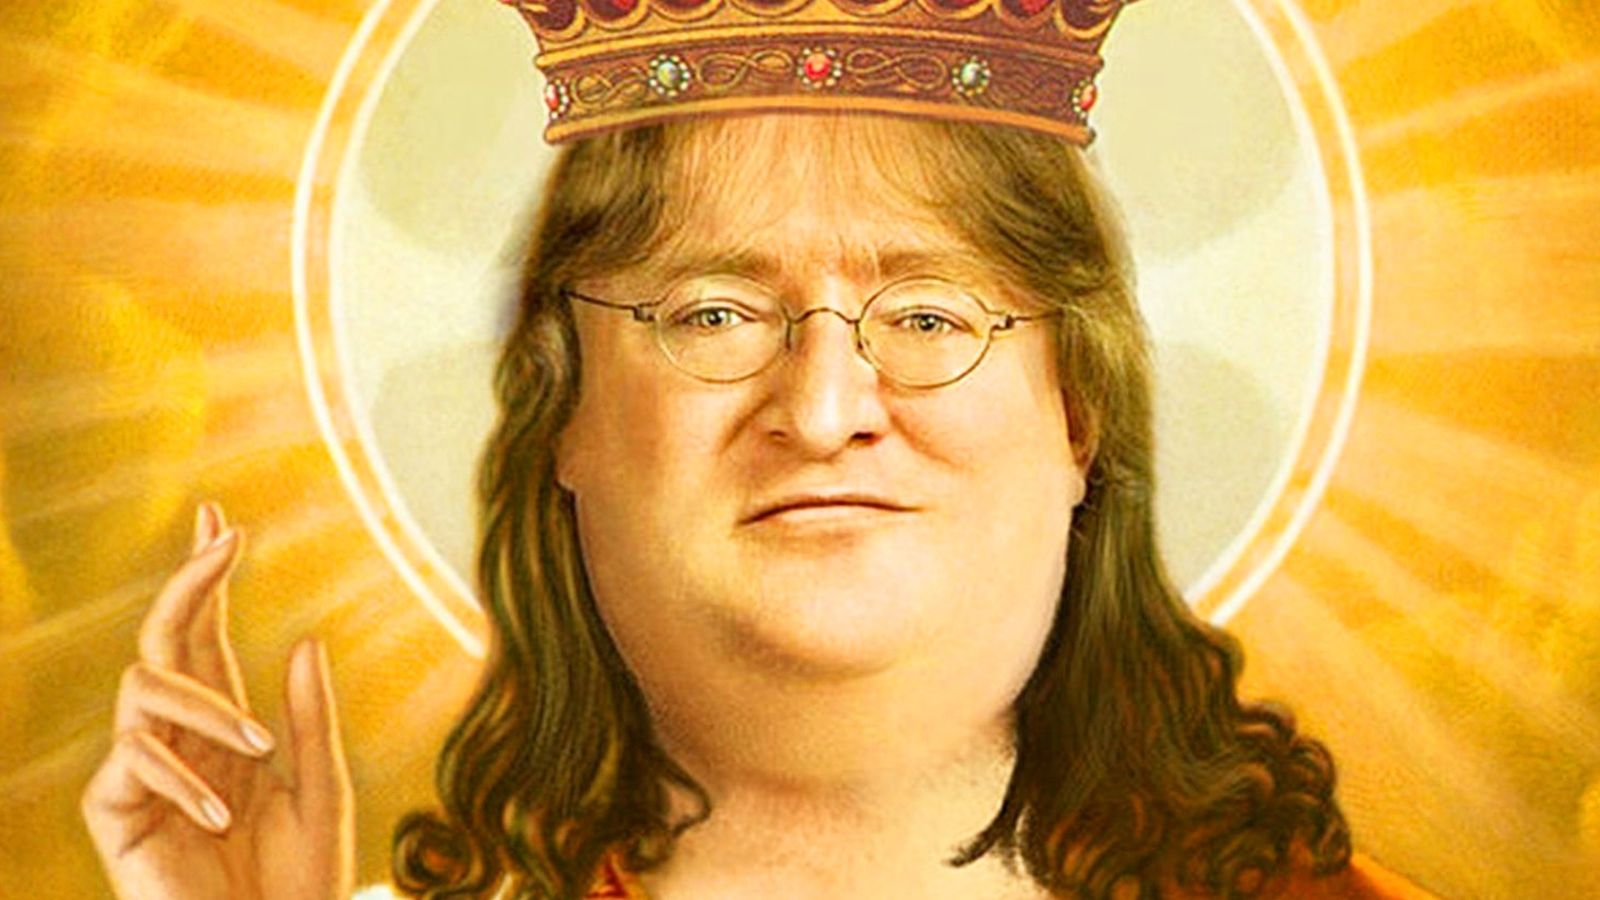 Lord Gabe Newell, the only one who can find the missing titanic submersible 